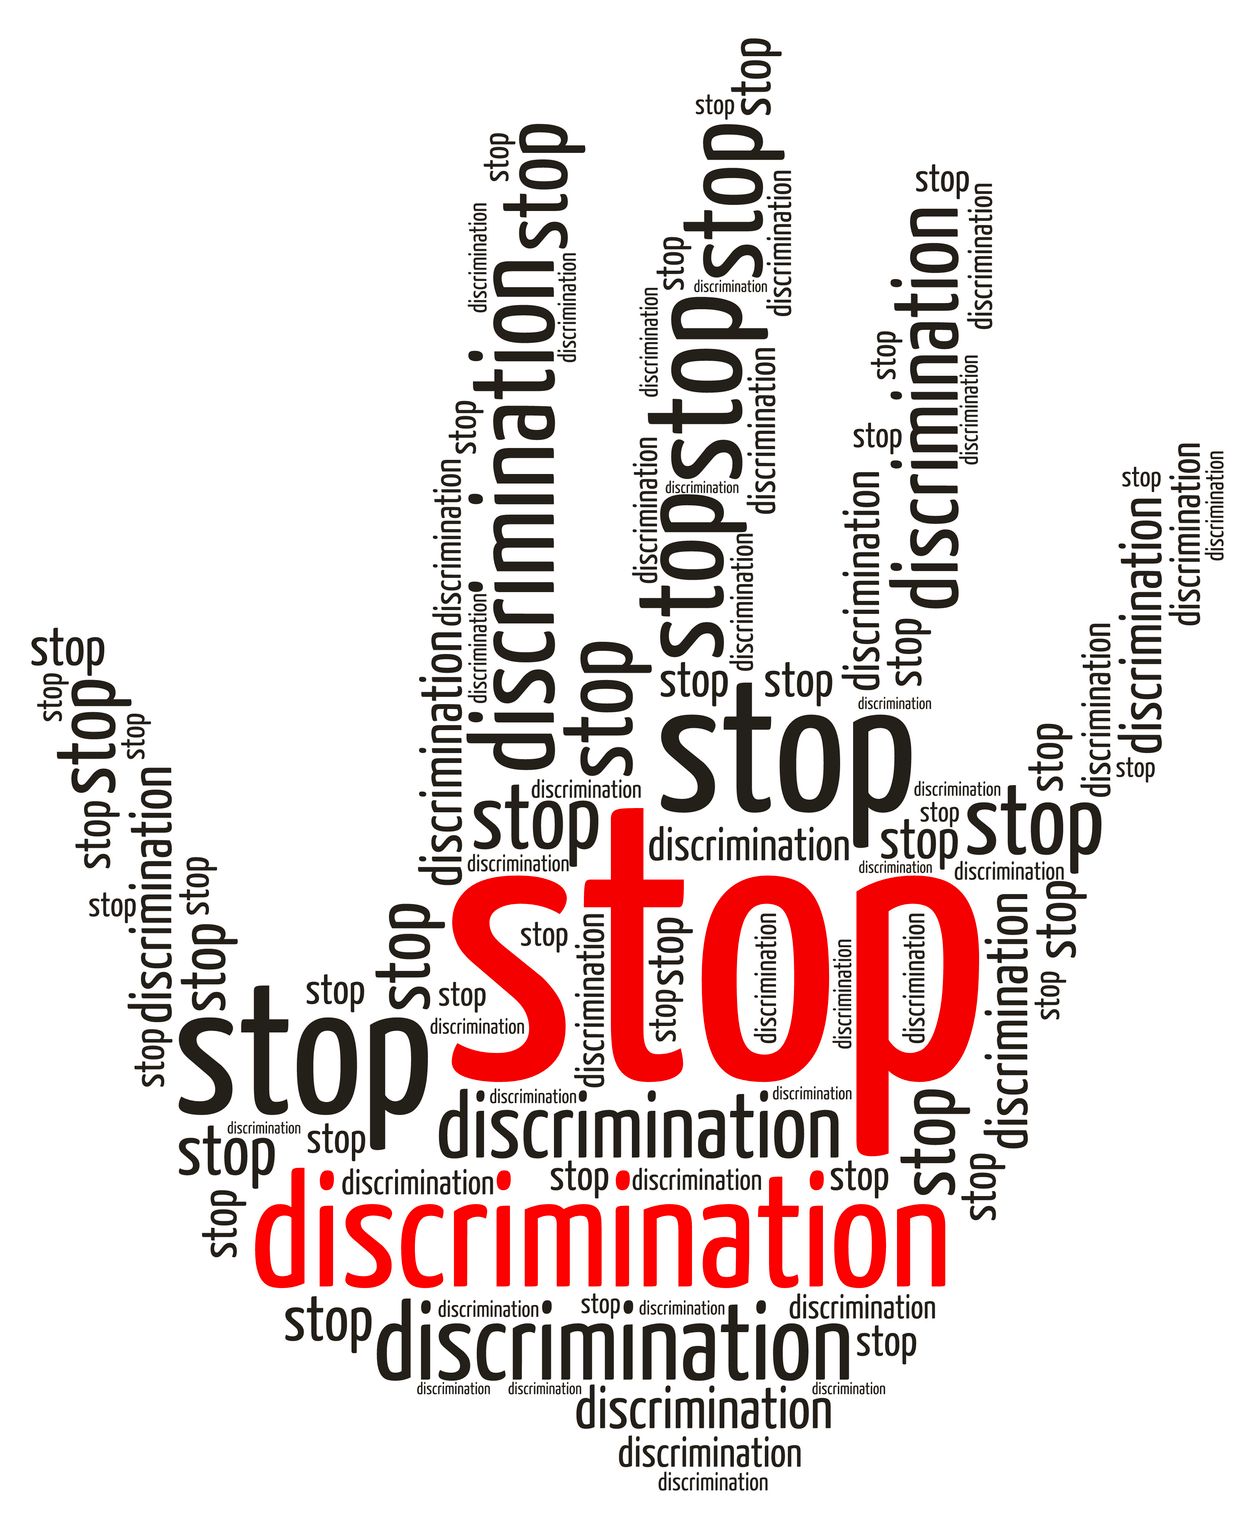 Stop Discrimination word cloud in the shape of a palm, isolated on white